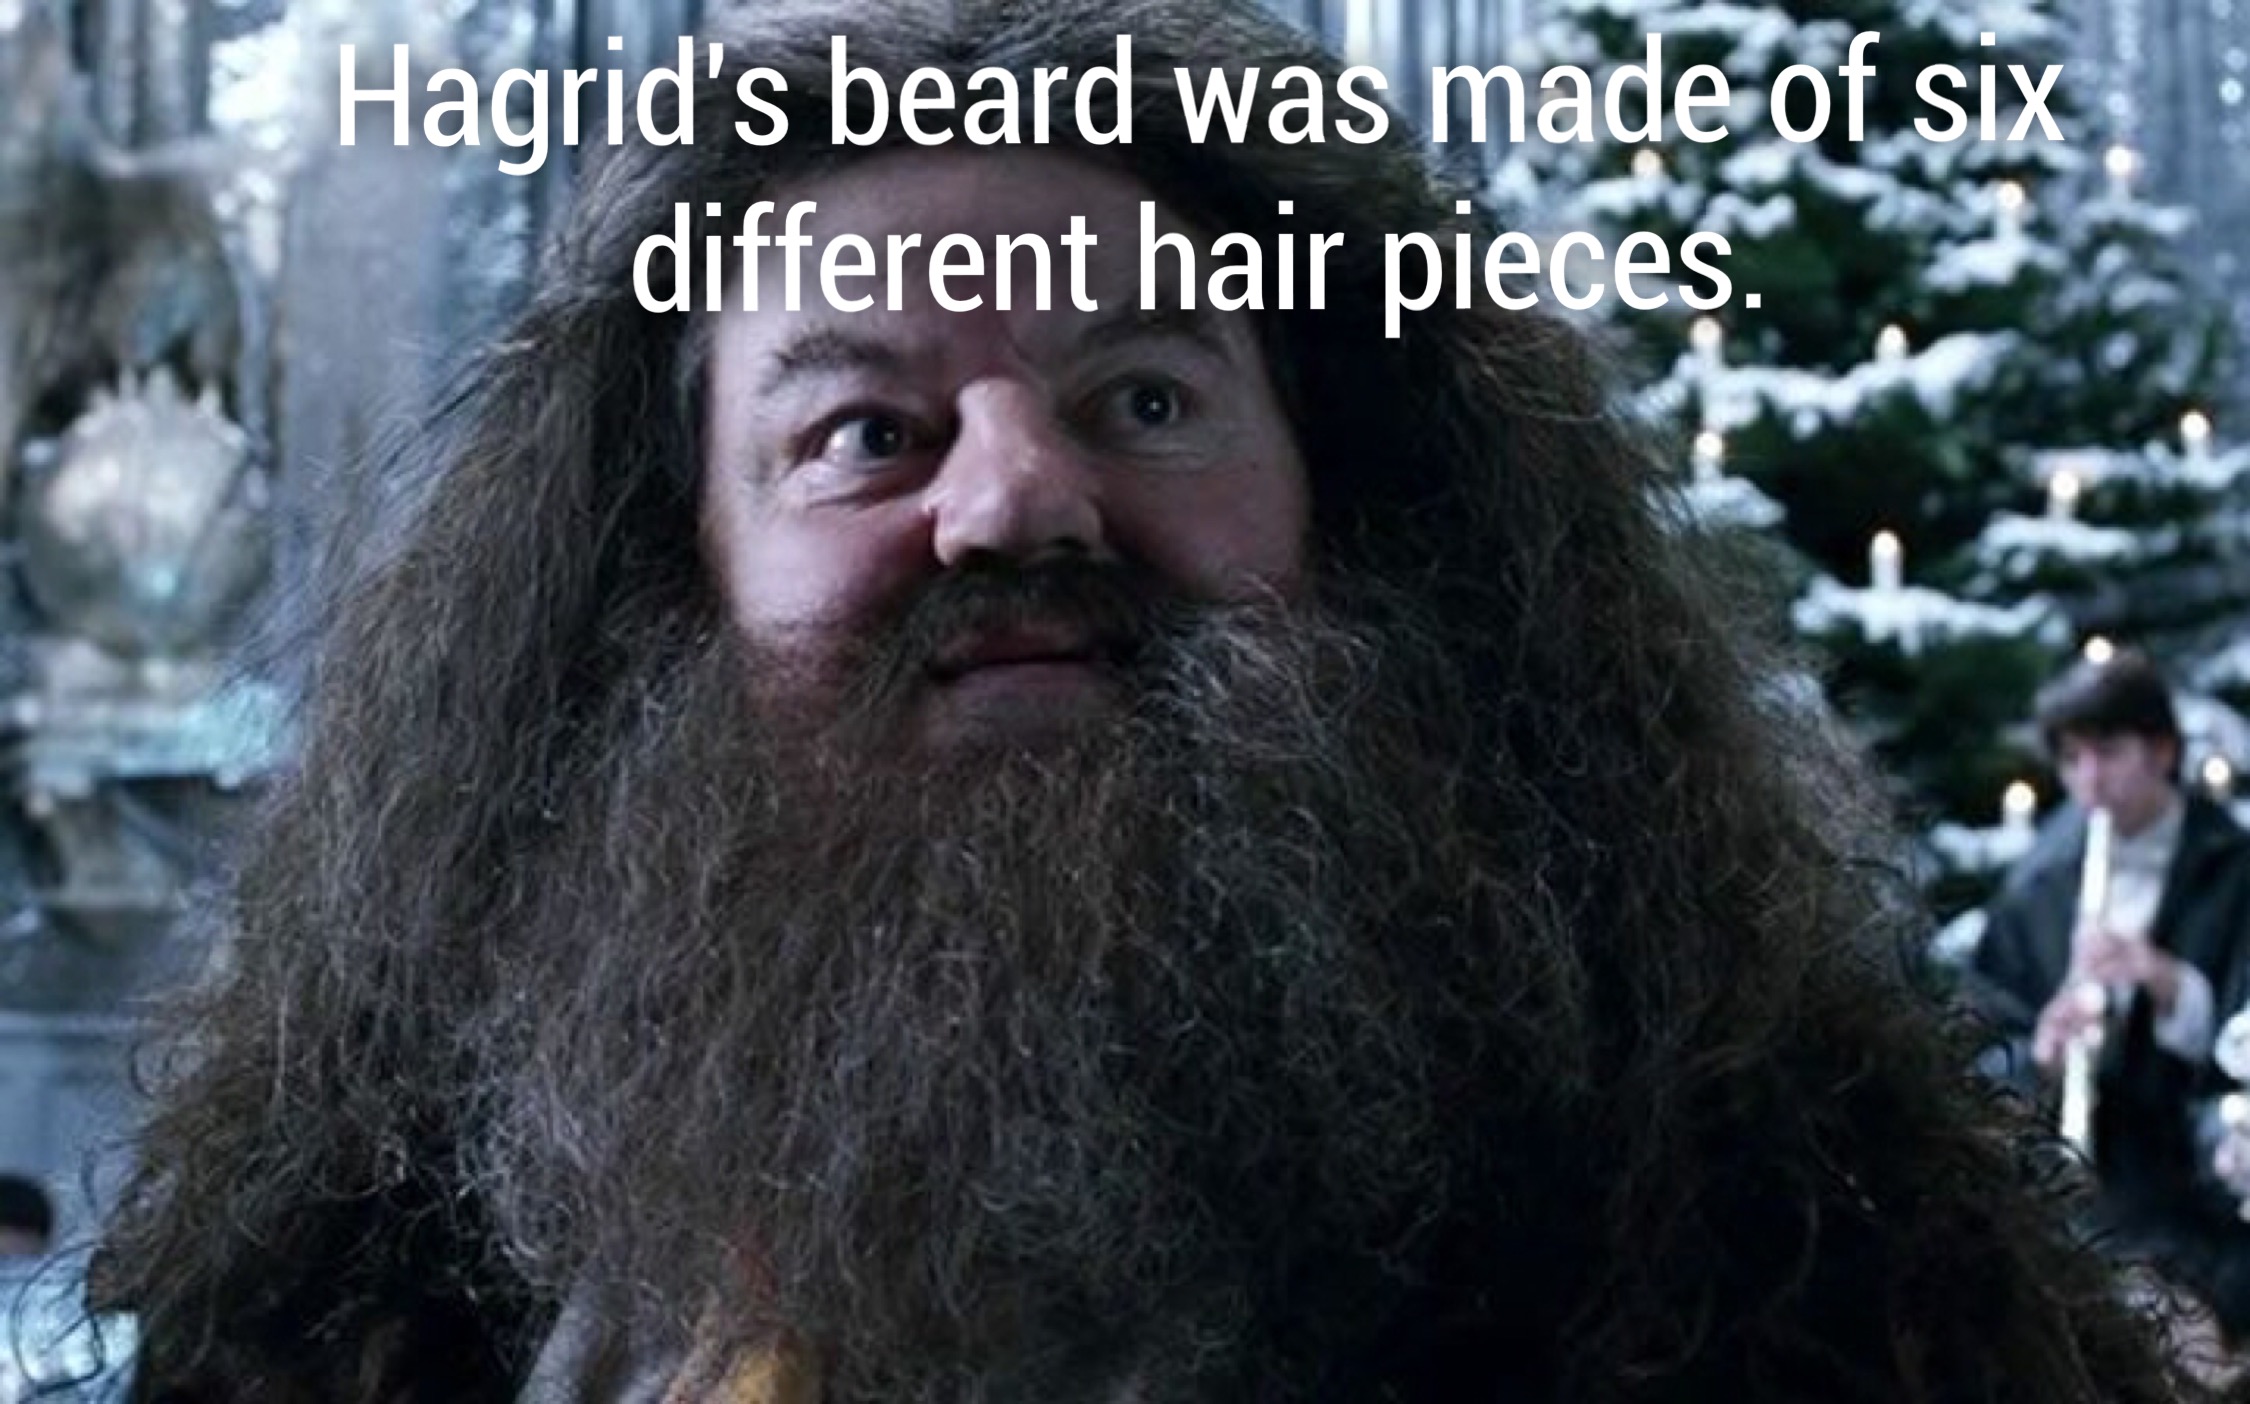 hagrid harry potter - Hagrid's beard was made of six different hair pieces.